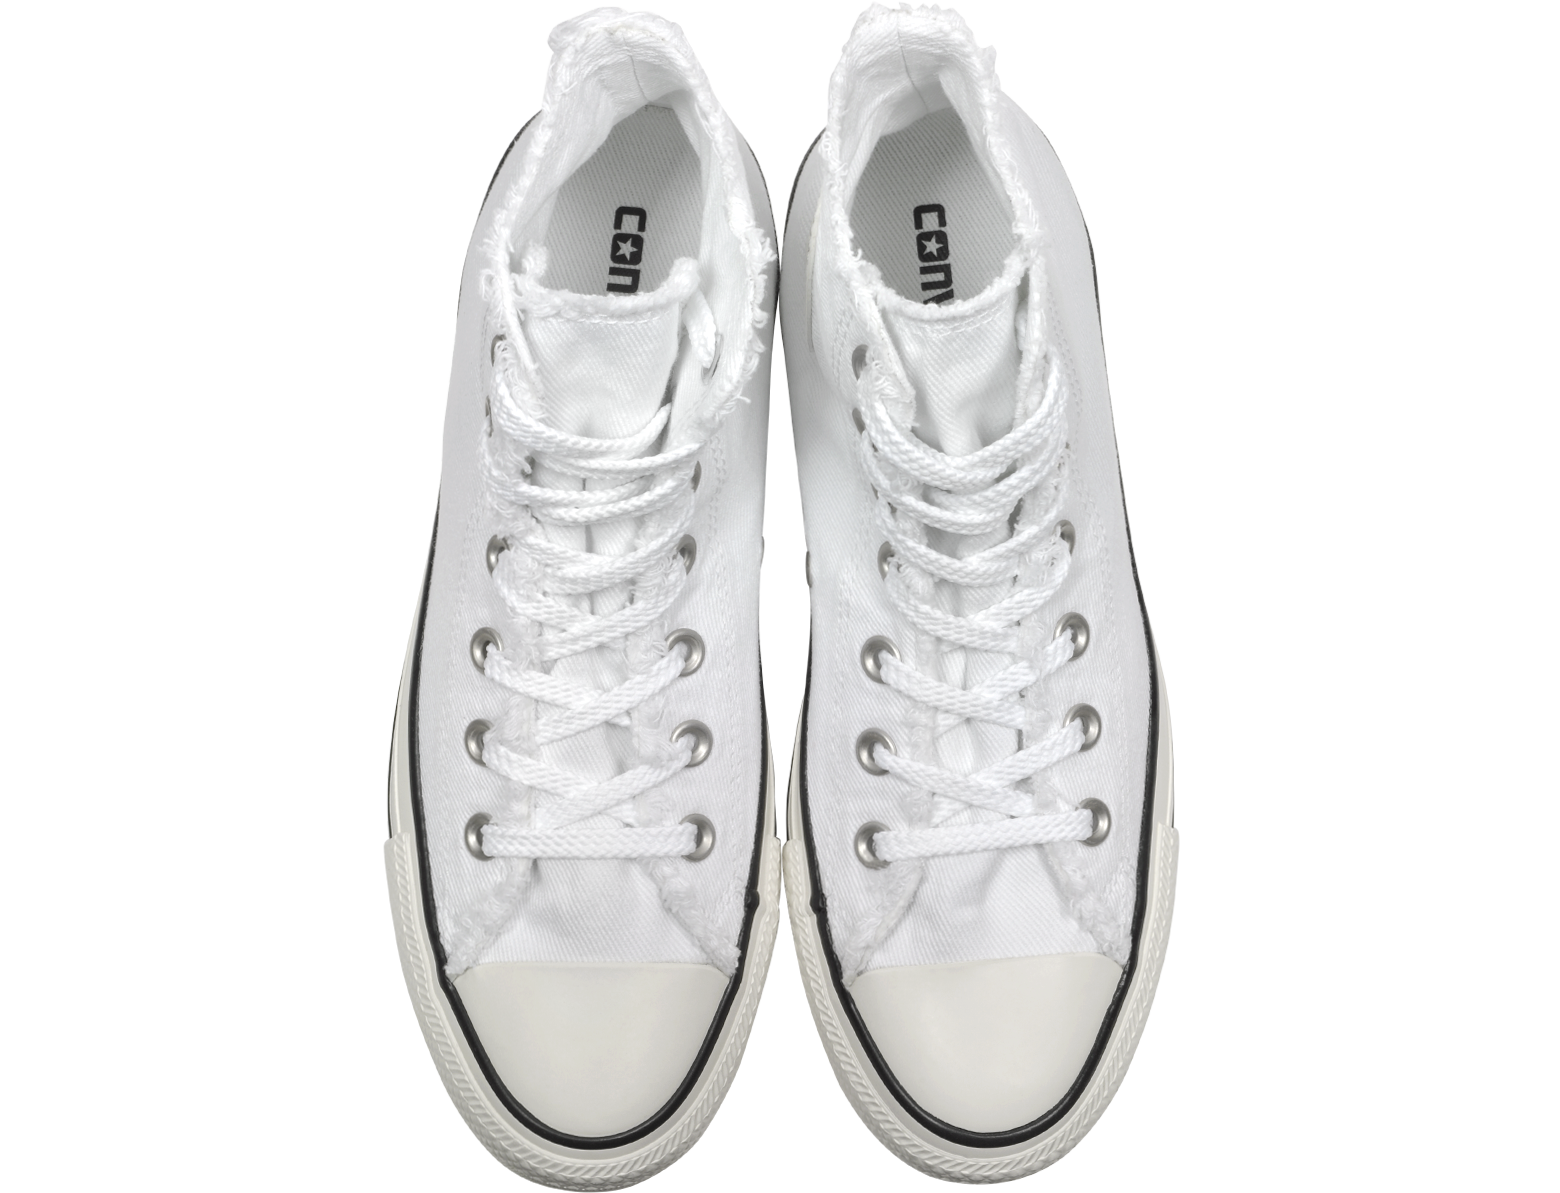 Converse Limited Edition Chuck Taylor All Star High White Canvas ...